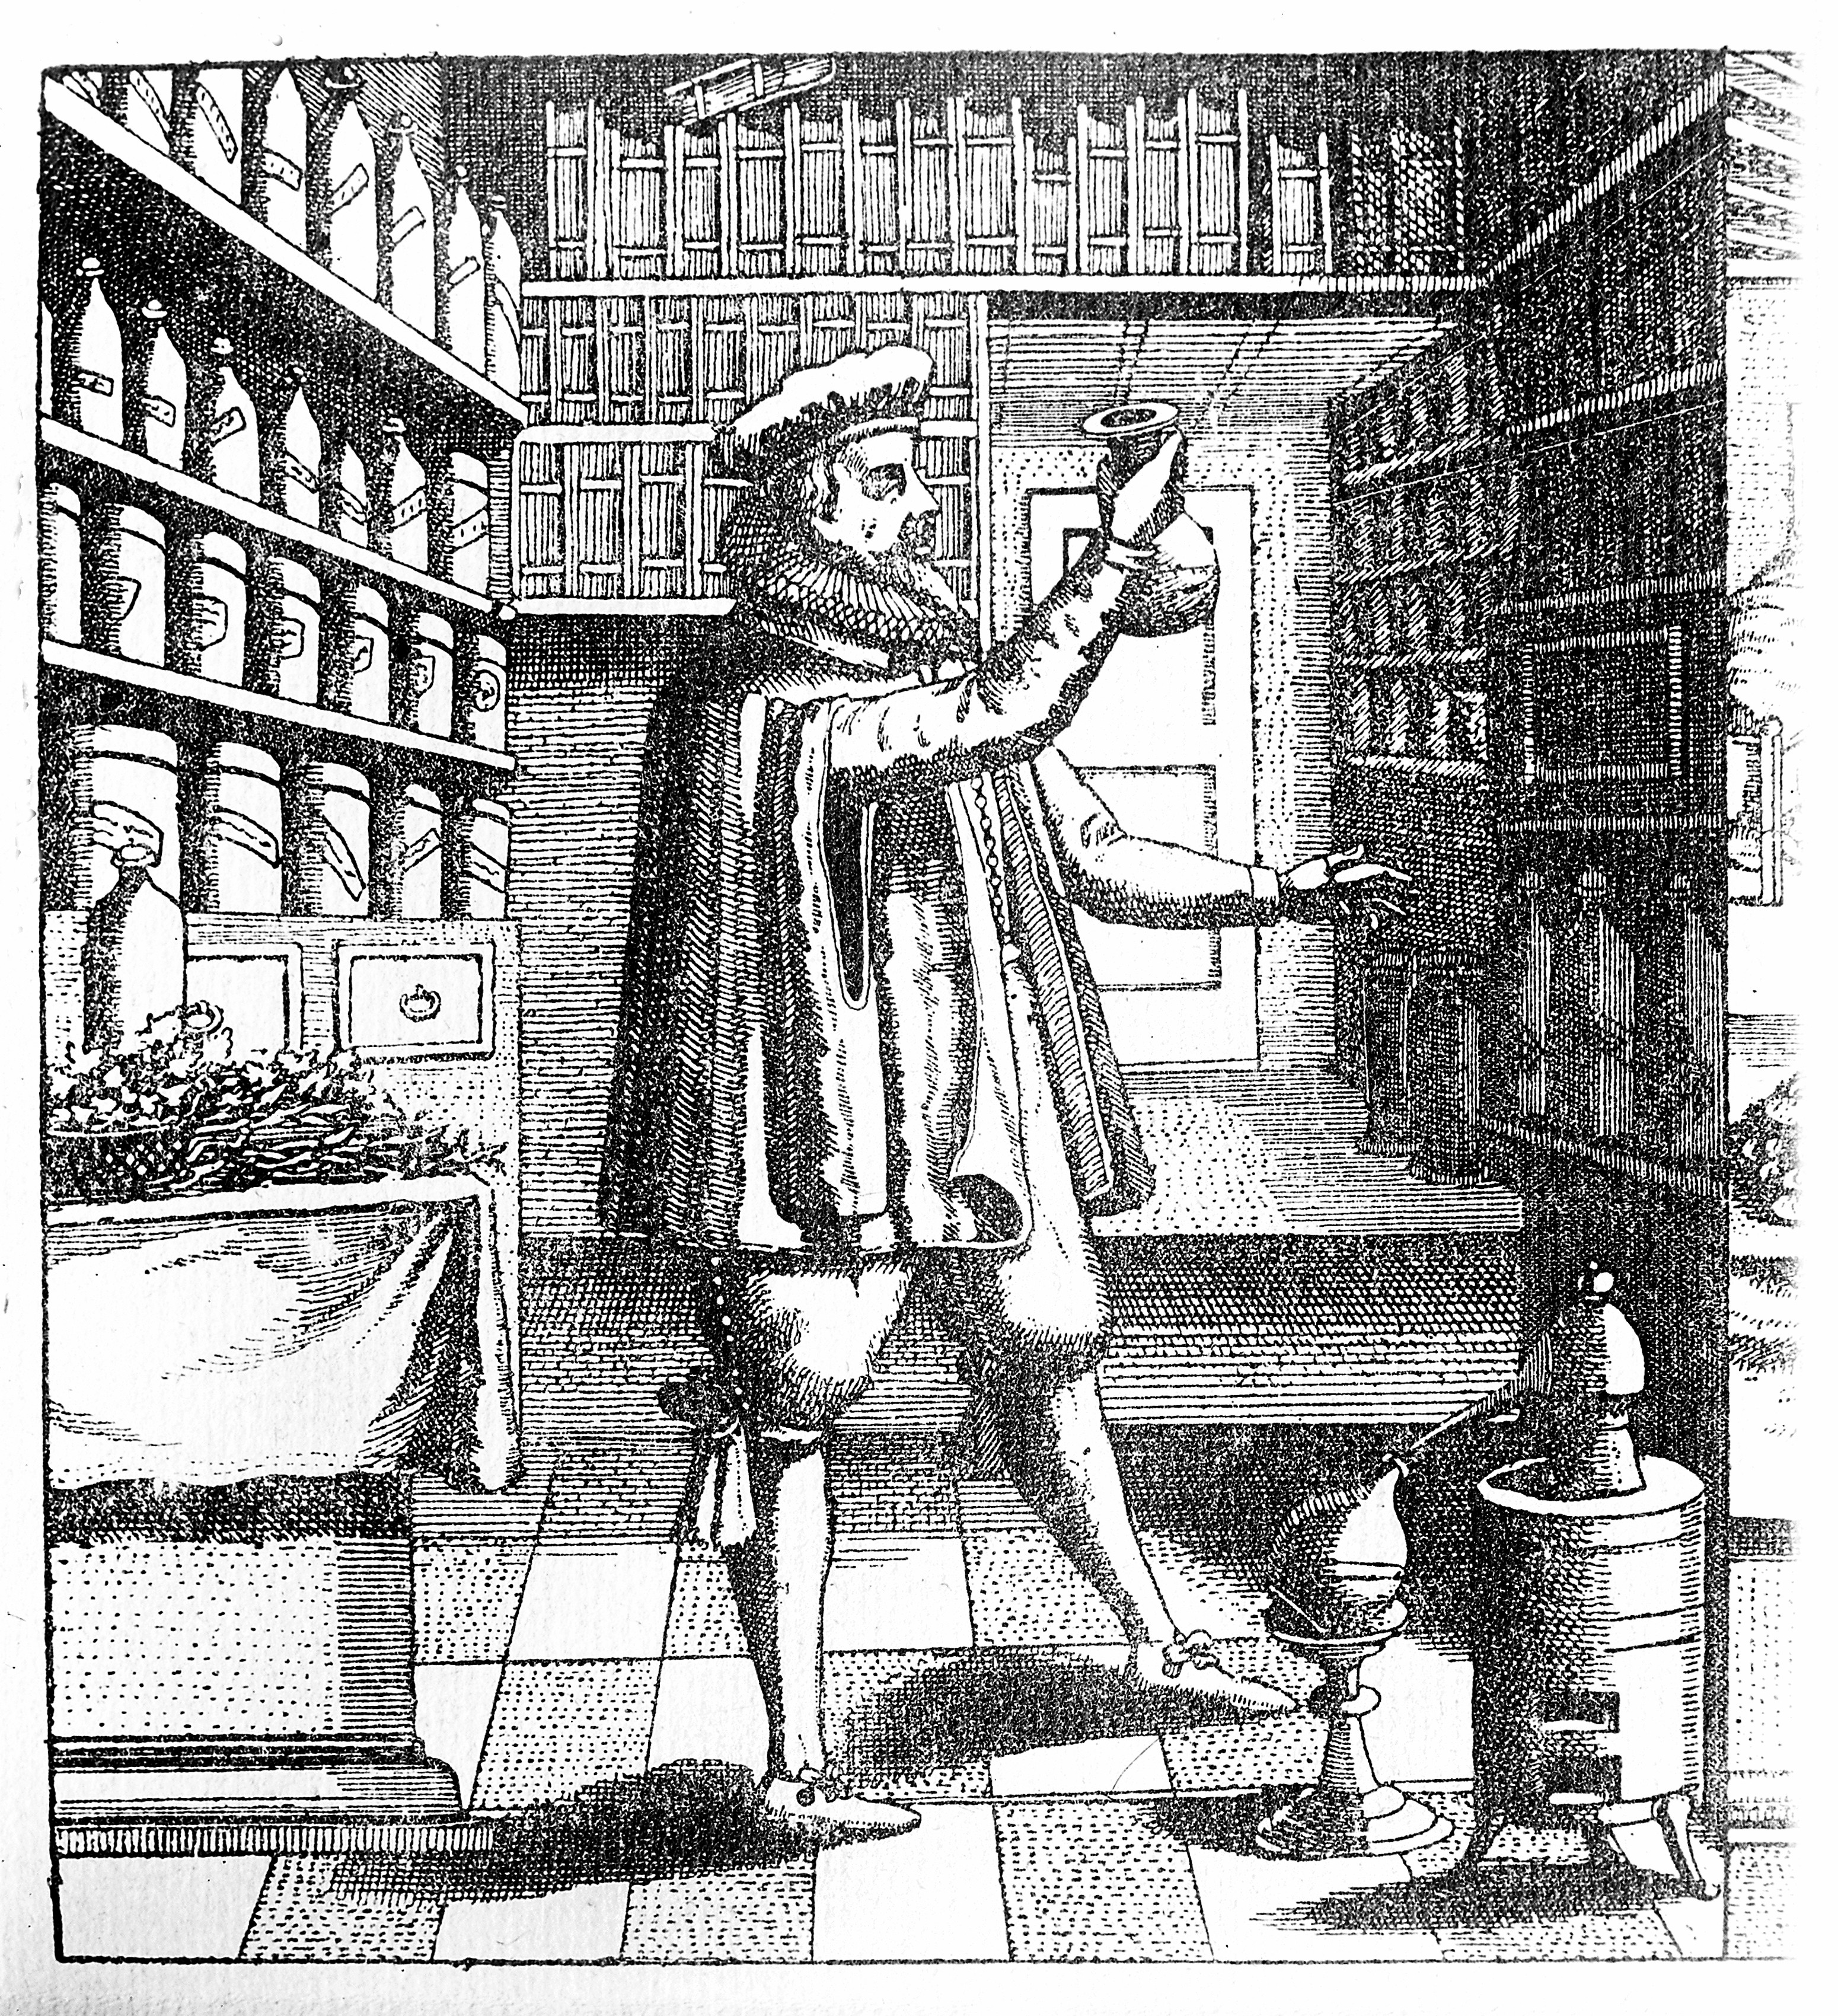 M0007386 Laboratory and library of an apothecary